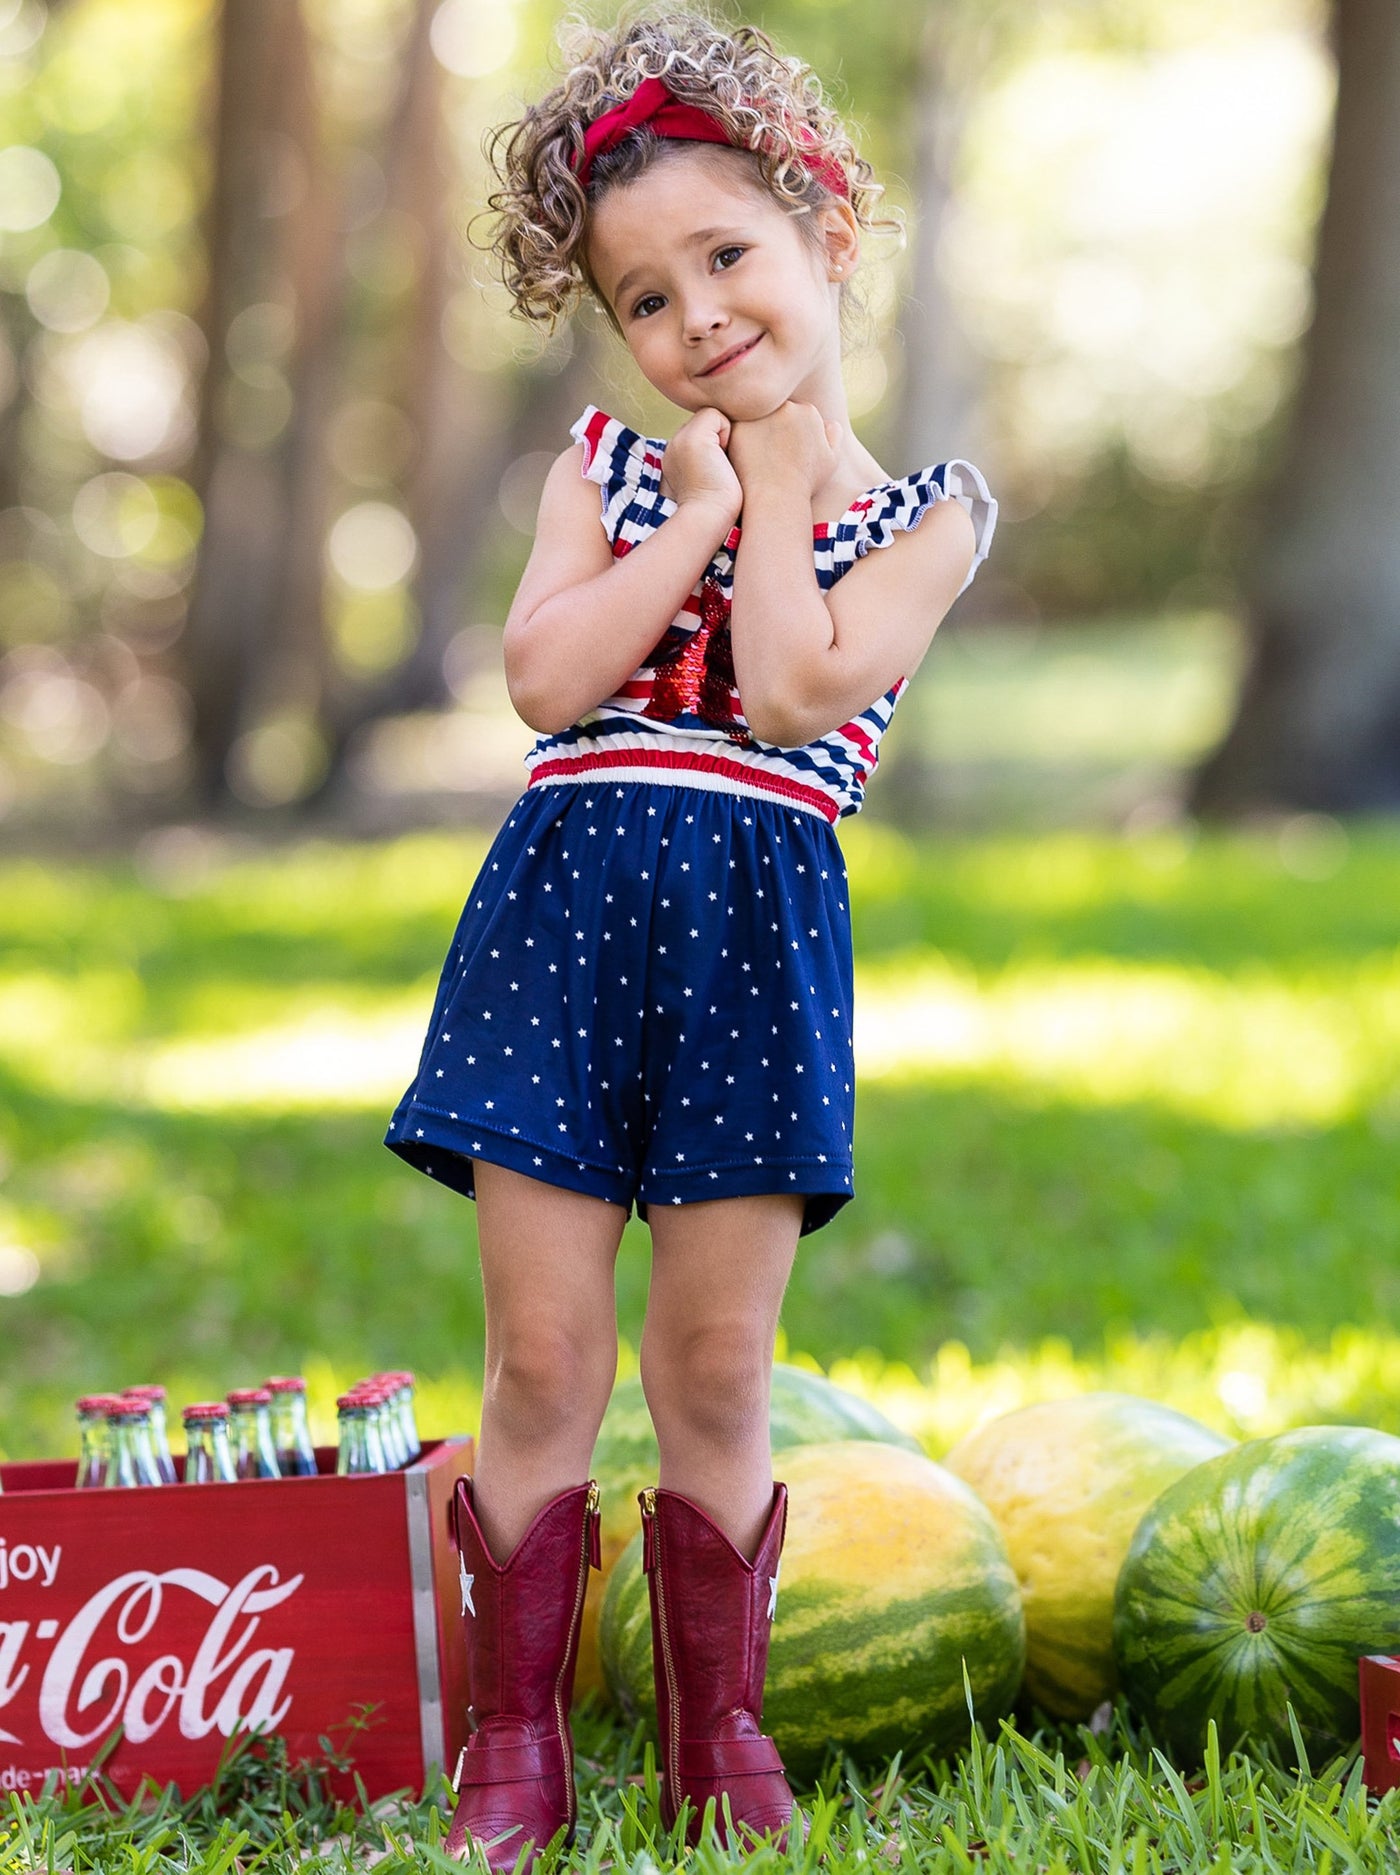 Girls romper features a white, blue, and red striped bodice with red sequin star and flutter sleeves, and blue shorts with white polka dots 2T-10Y for toddlers and girls